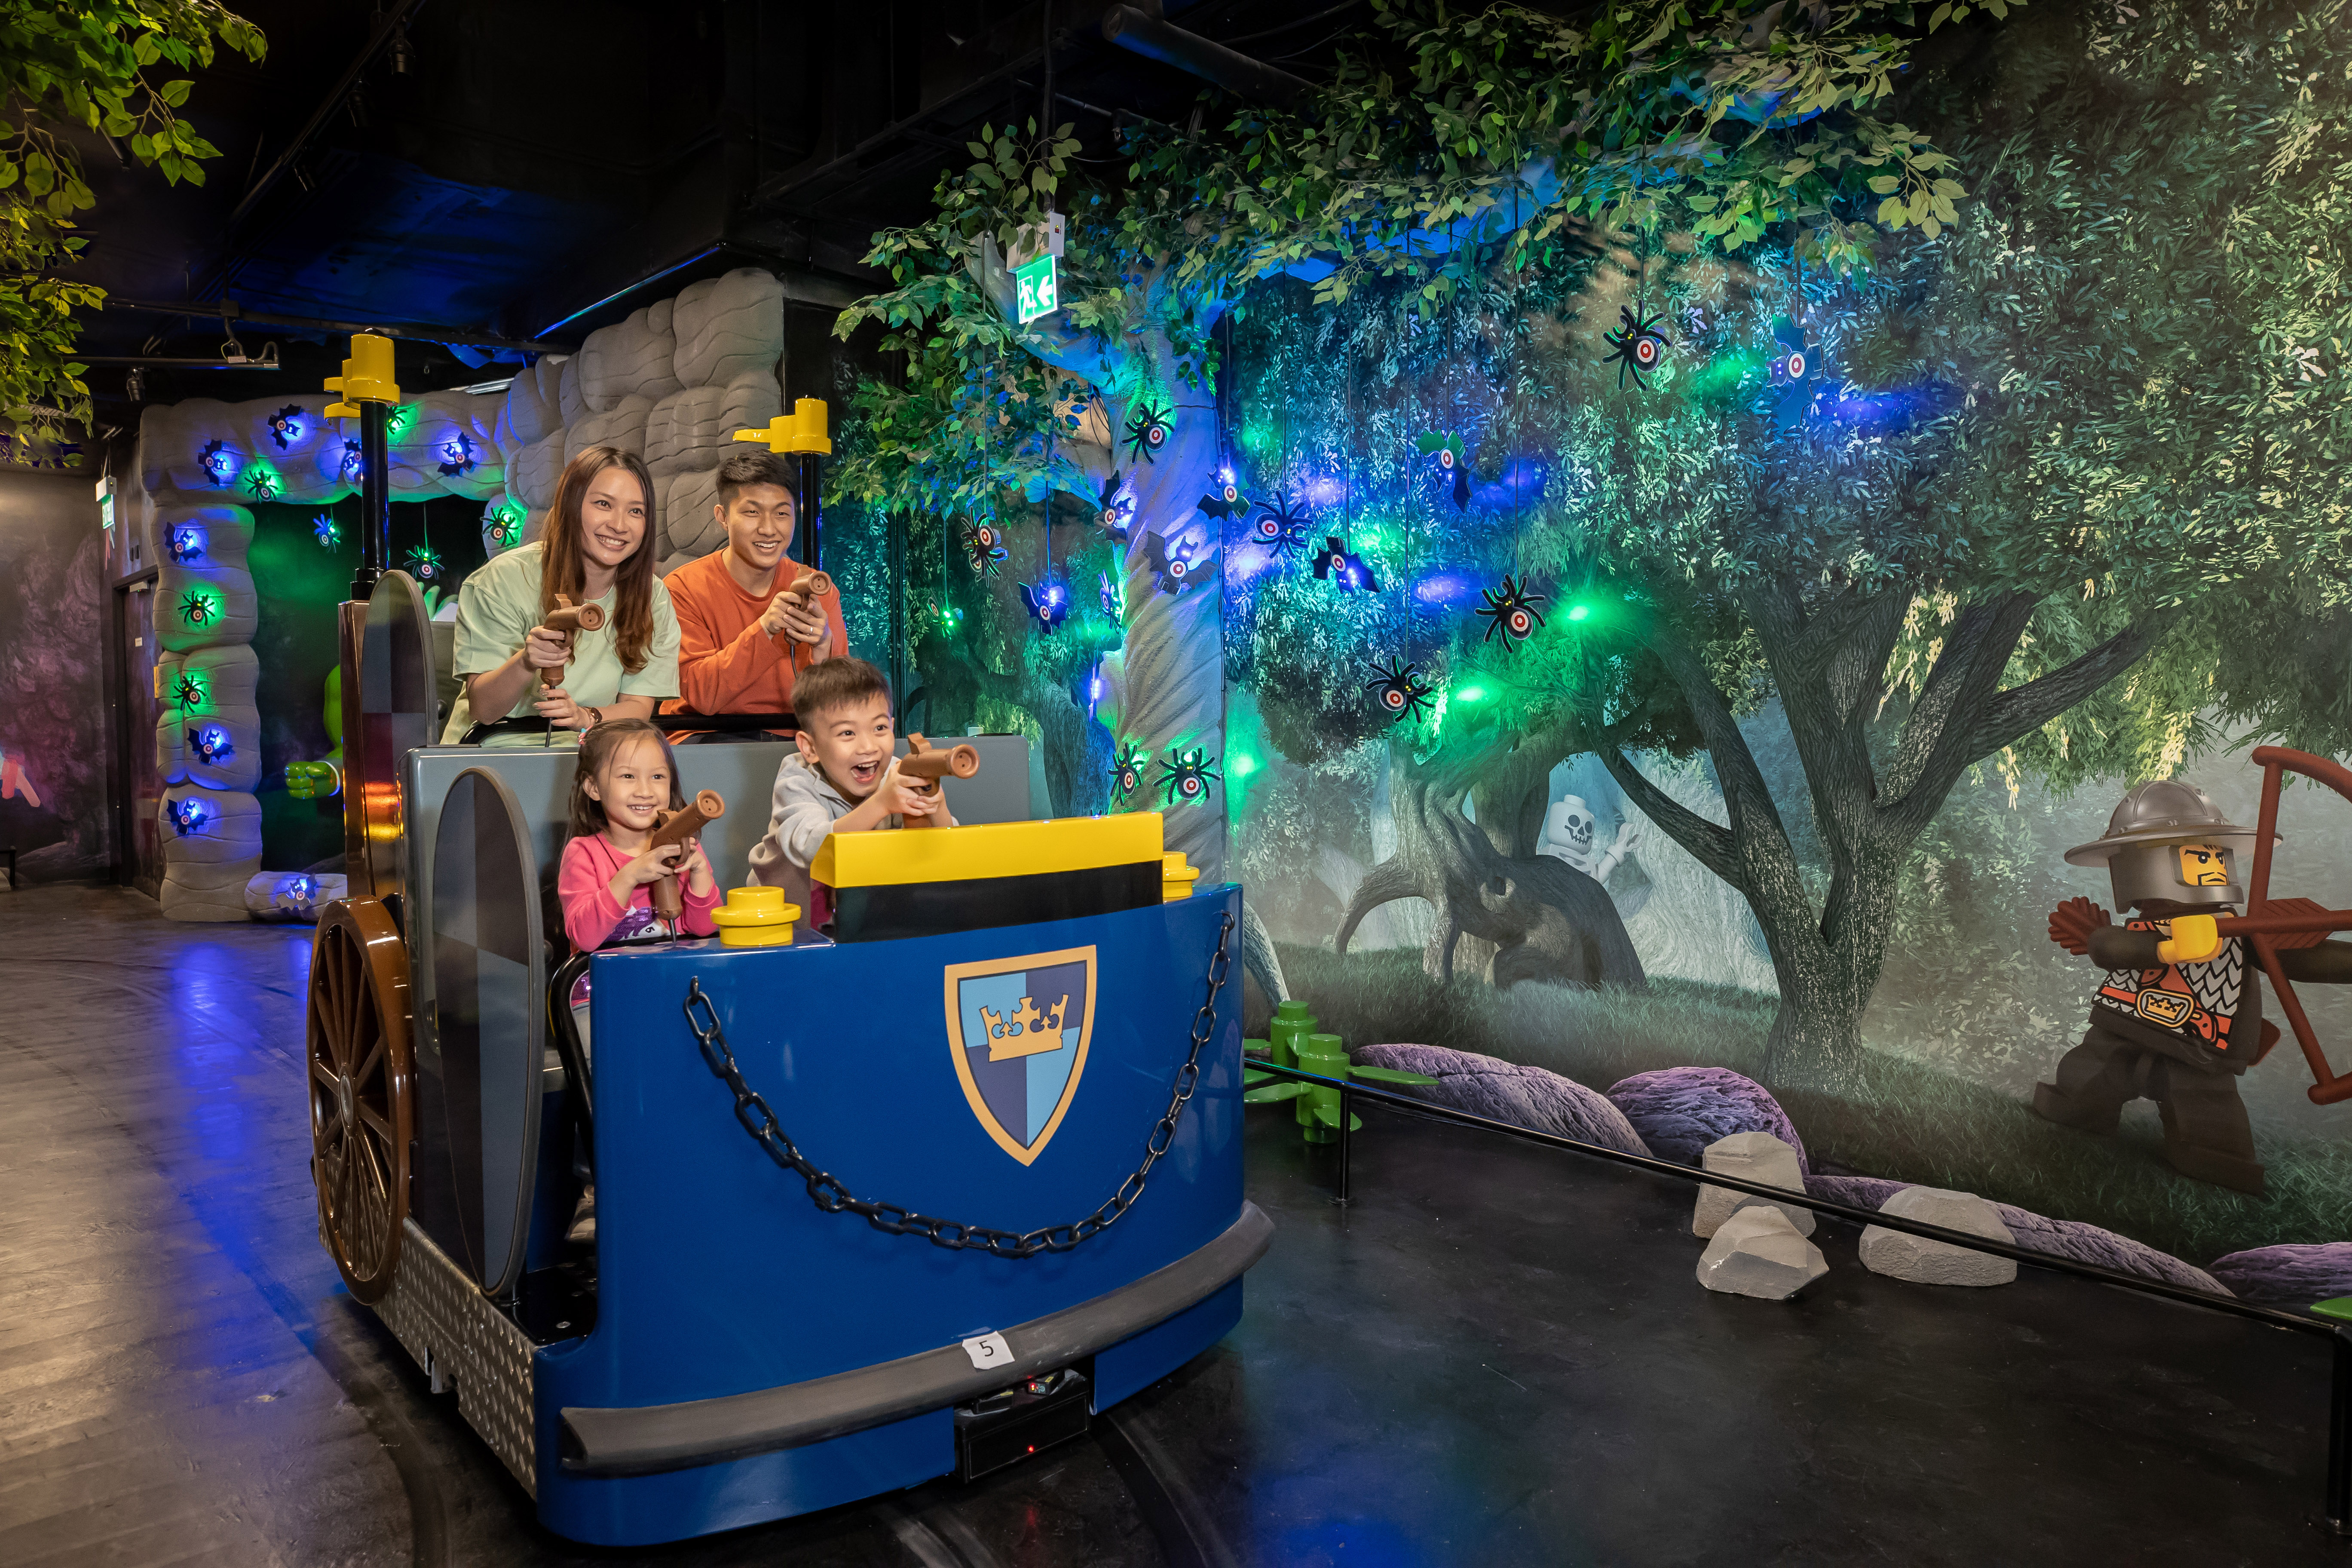 Parents and kids are riding the chariot in the Kingdom Quest ride.